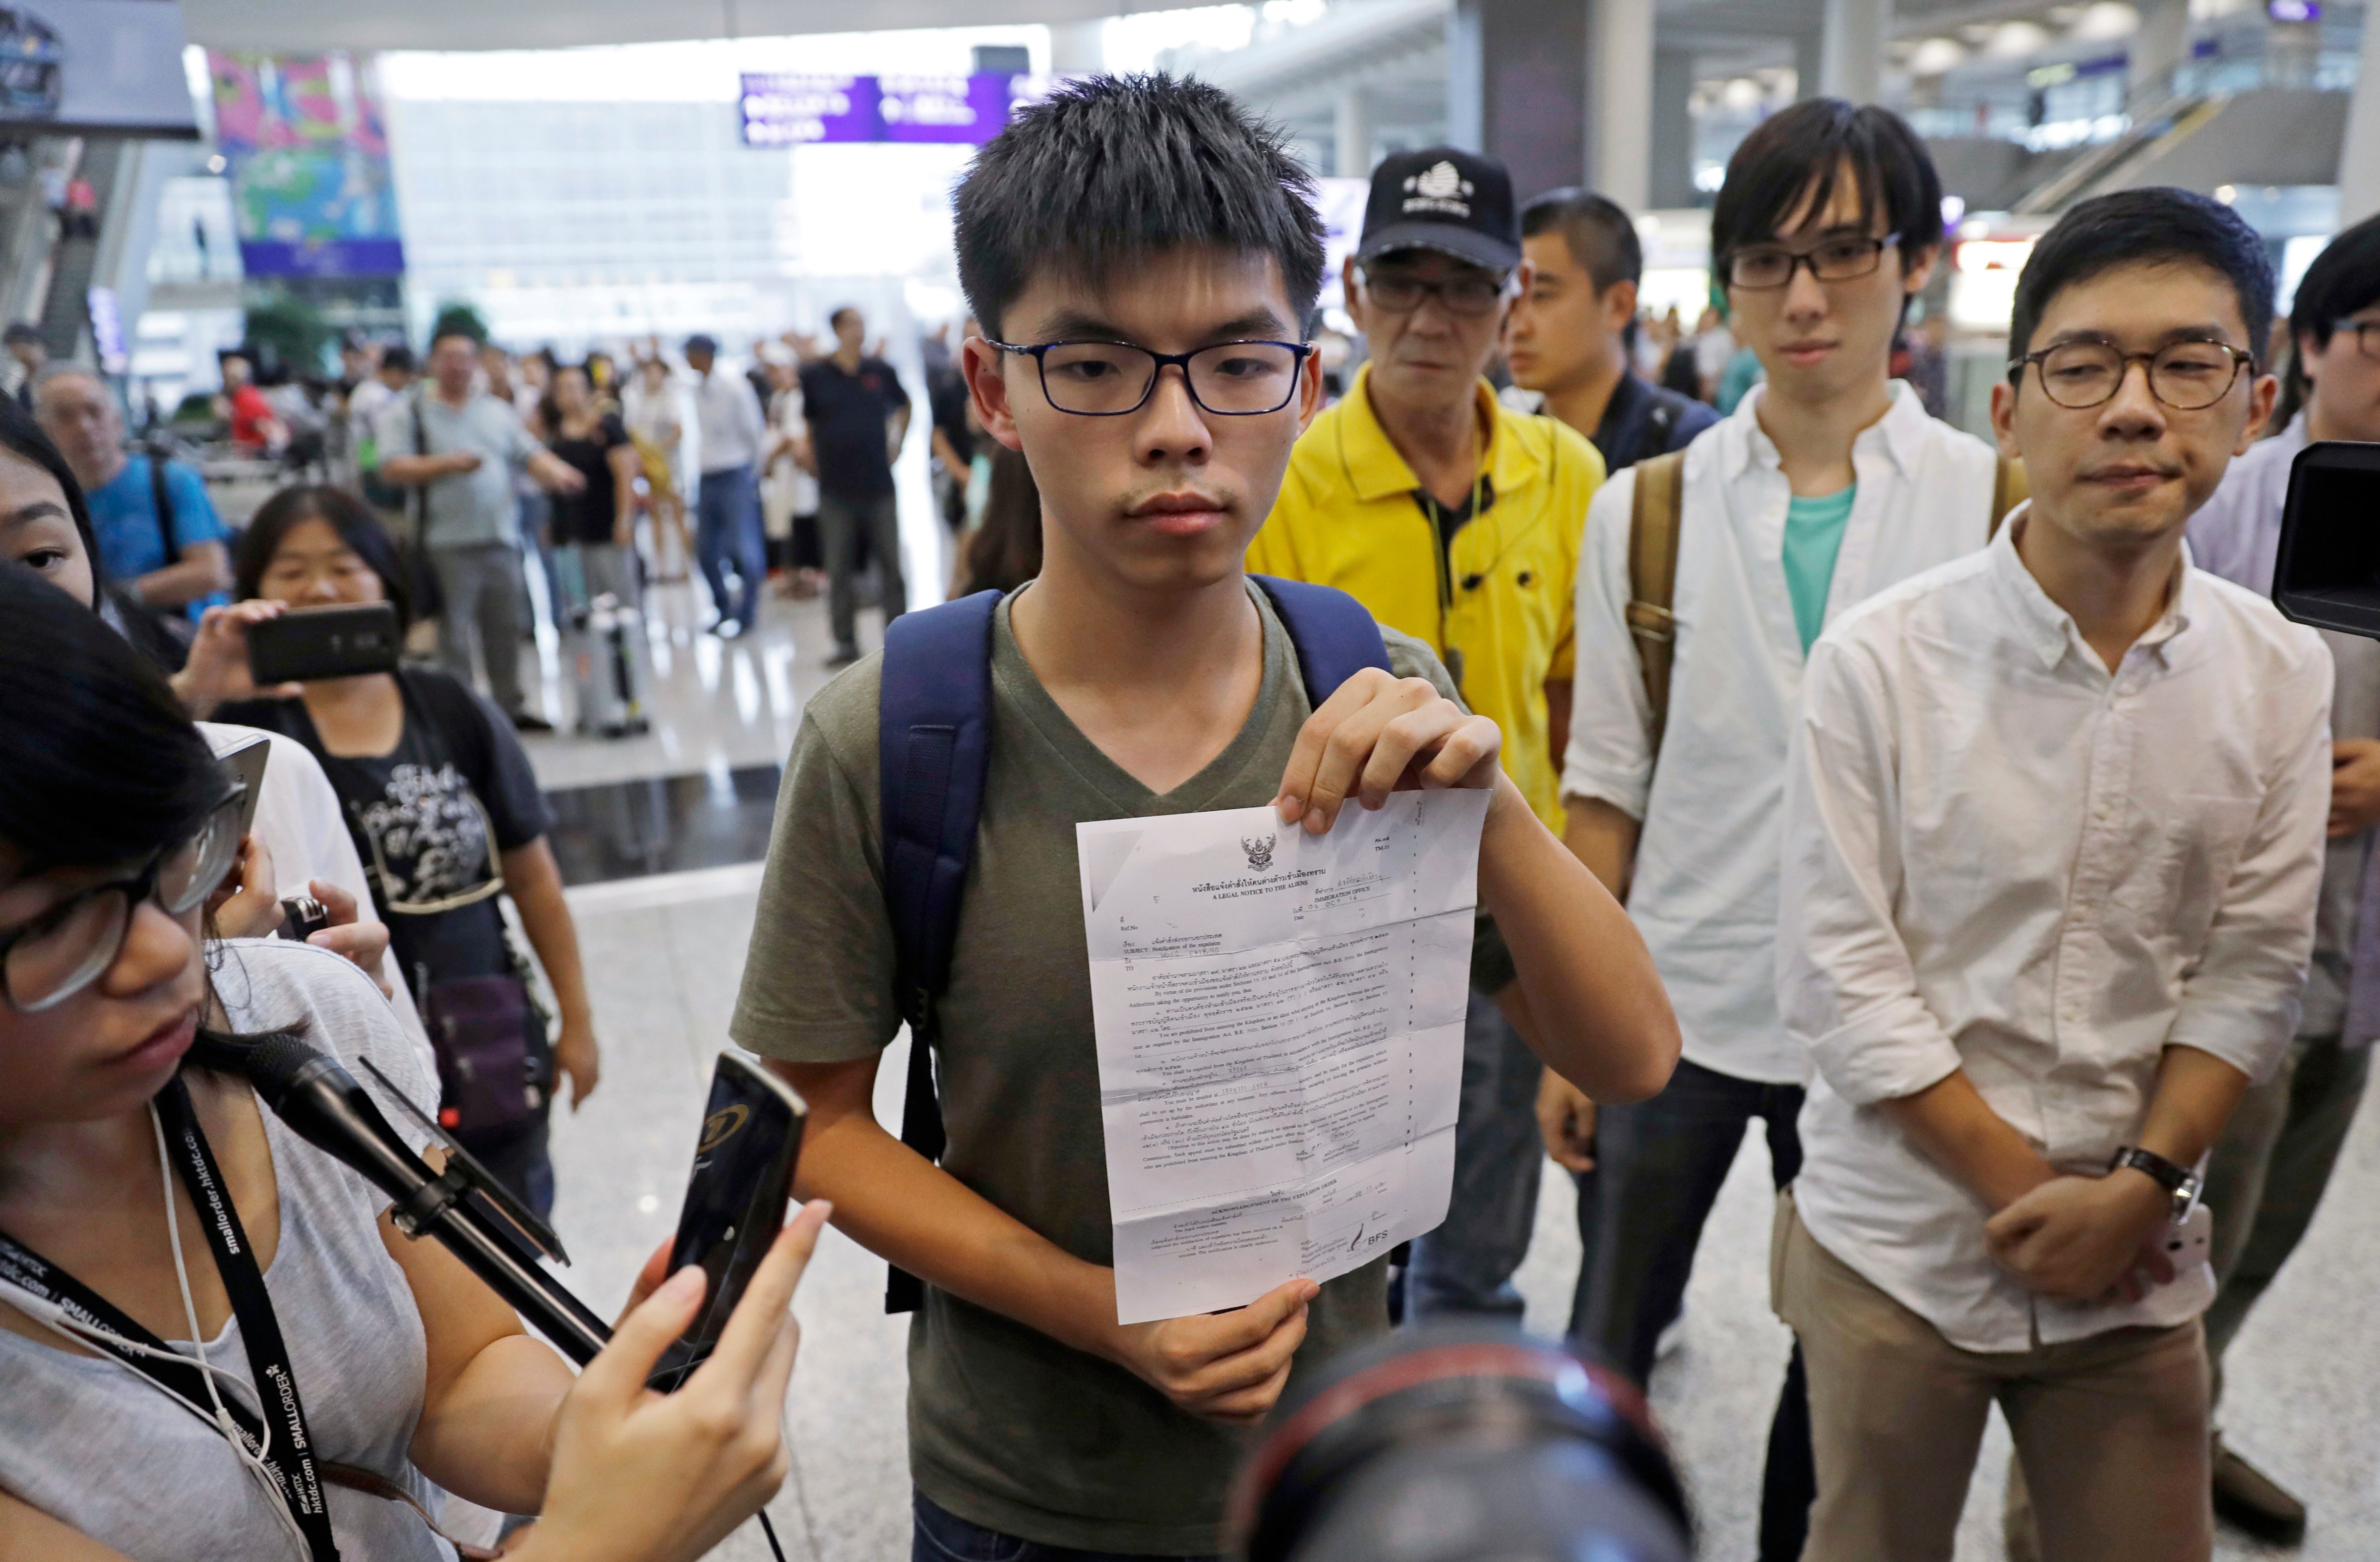 Hong Kong pro-democracy activist Joshua Wong, center, shows a letter from Thailand's immigration office after arriving at Hong Kong airport from Bangkok on Oct. 5, 2016. Thailand stopped the 19-year-old activist from entering the country and sent him back to Hong Kong, officials said, in a move supporters suspected was triggered by pressure from Beijing (Kin Cheung—AP)